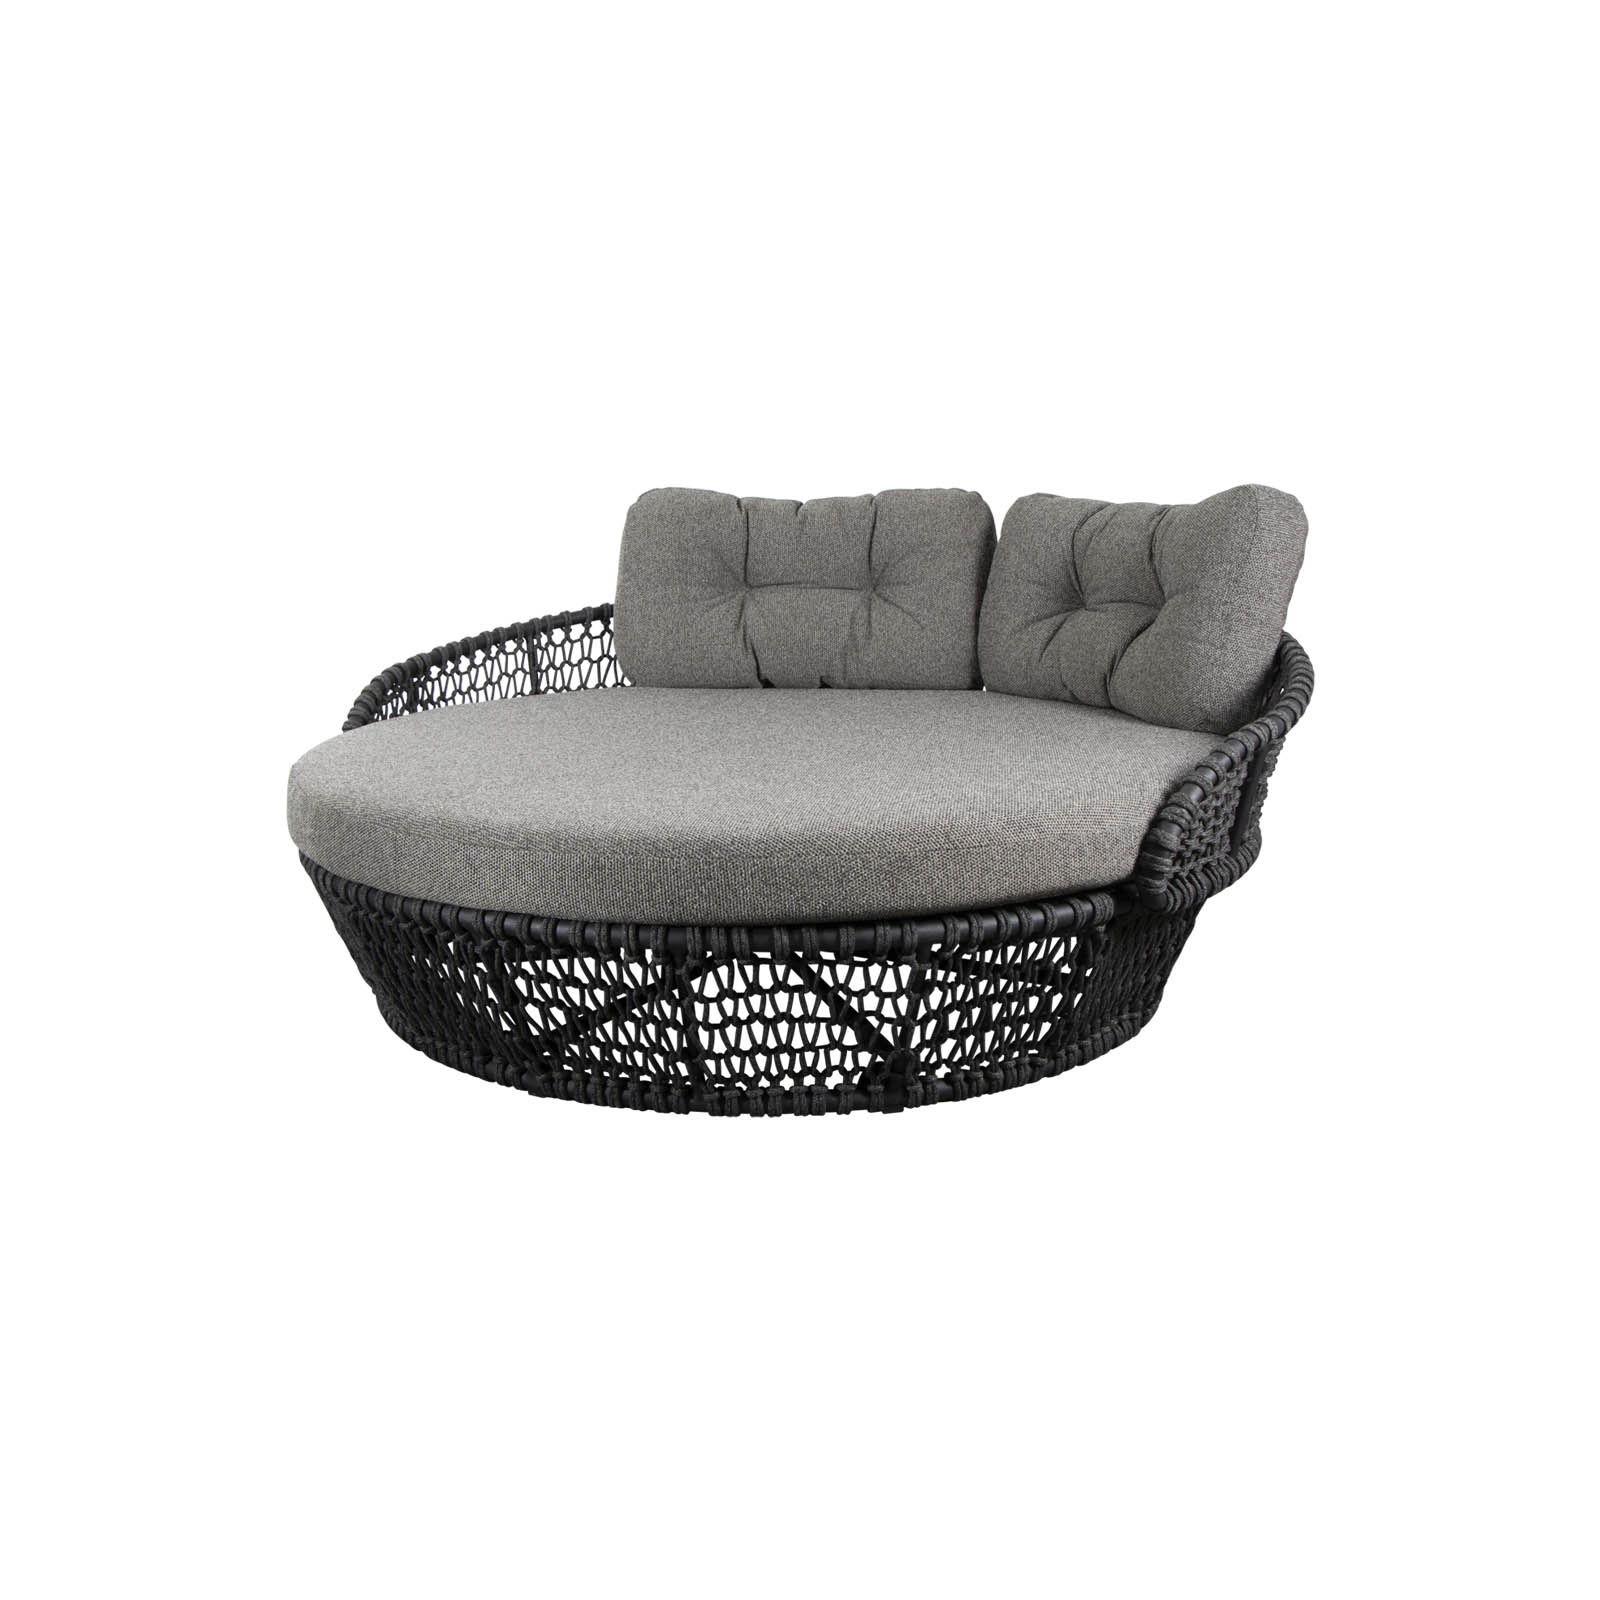 Ocean groß Daybed aus Cane-line Soft Rope in Dark Grey mit Kissen aus Cane-line Wove in Dark Grey